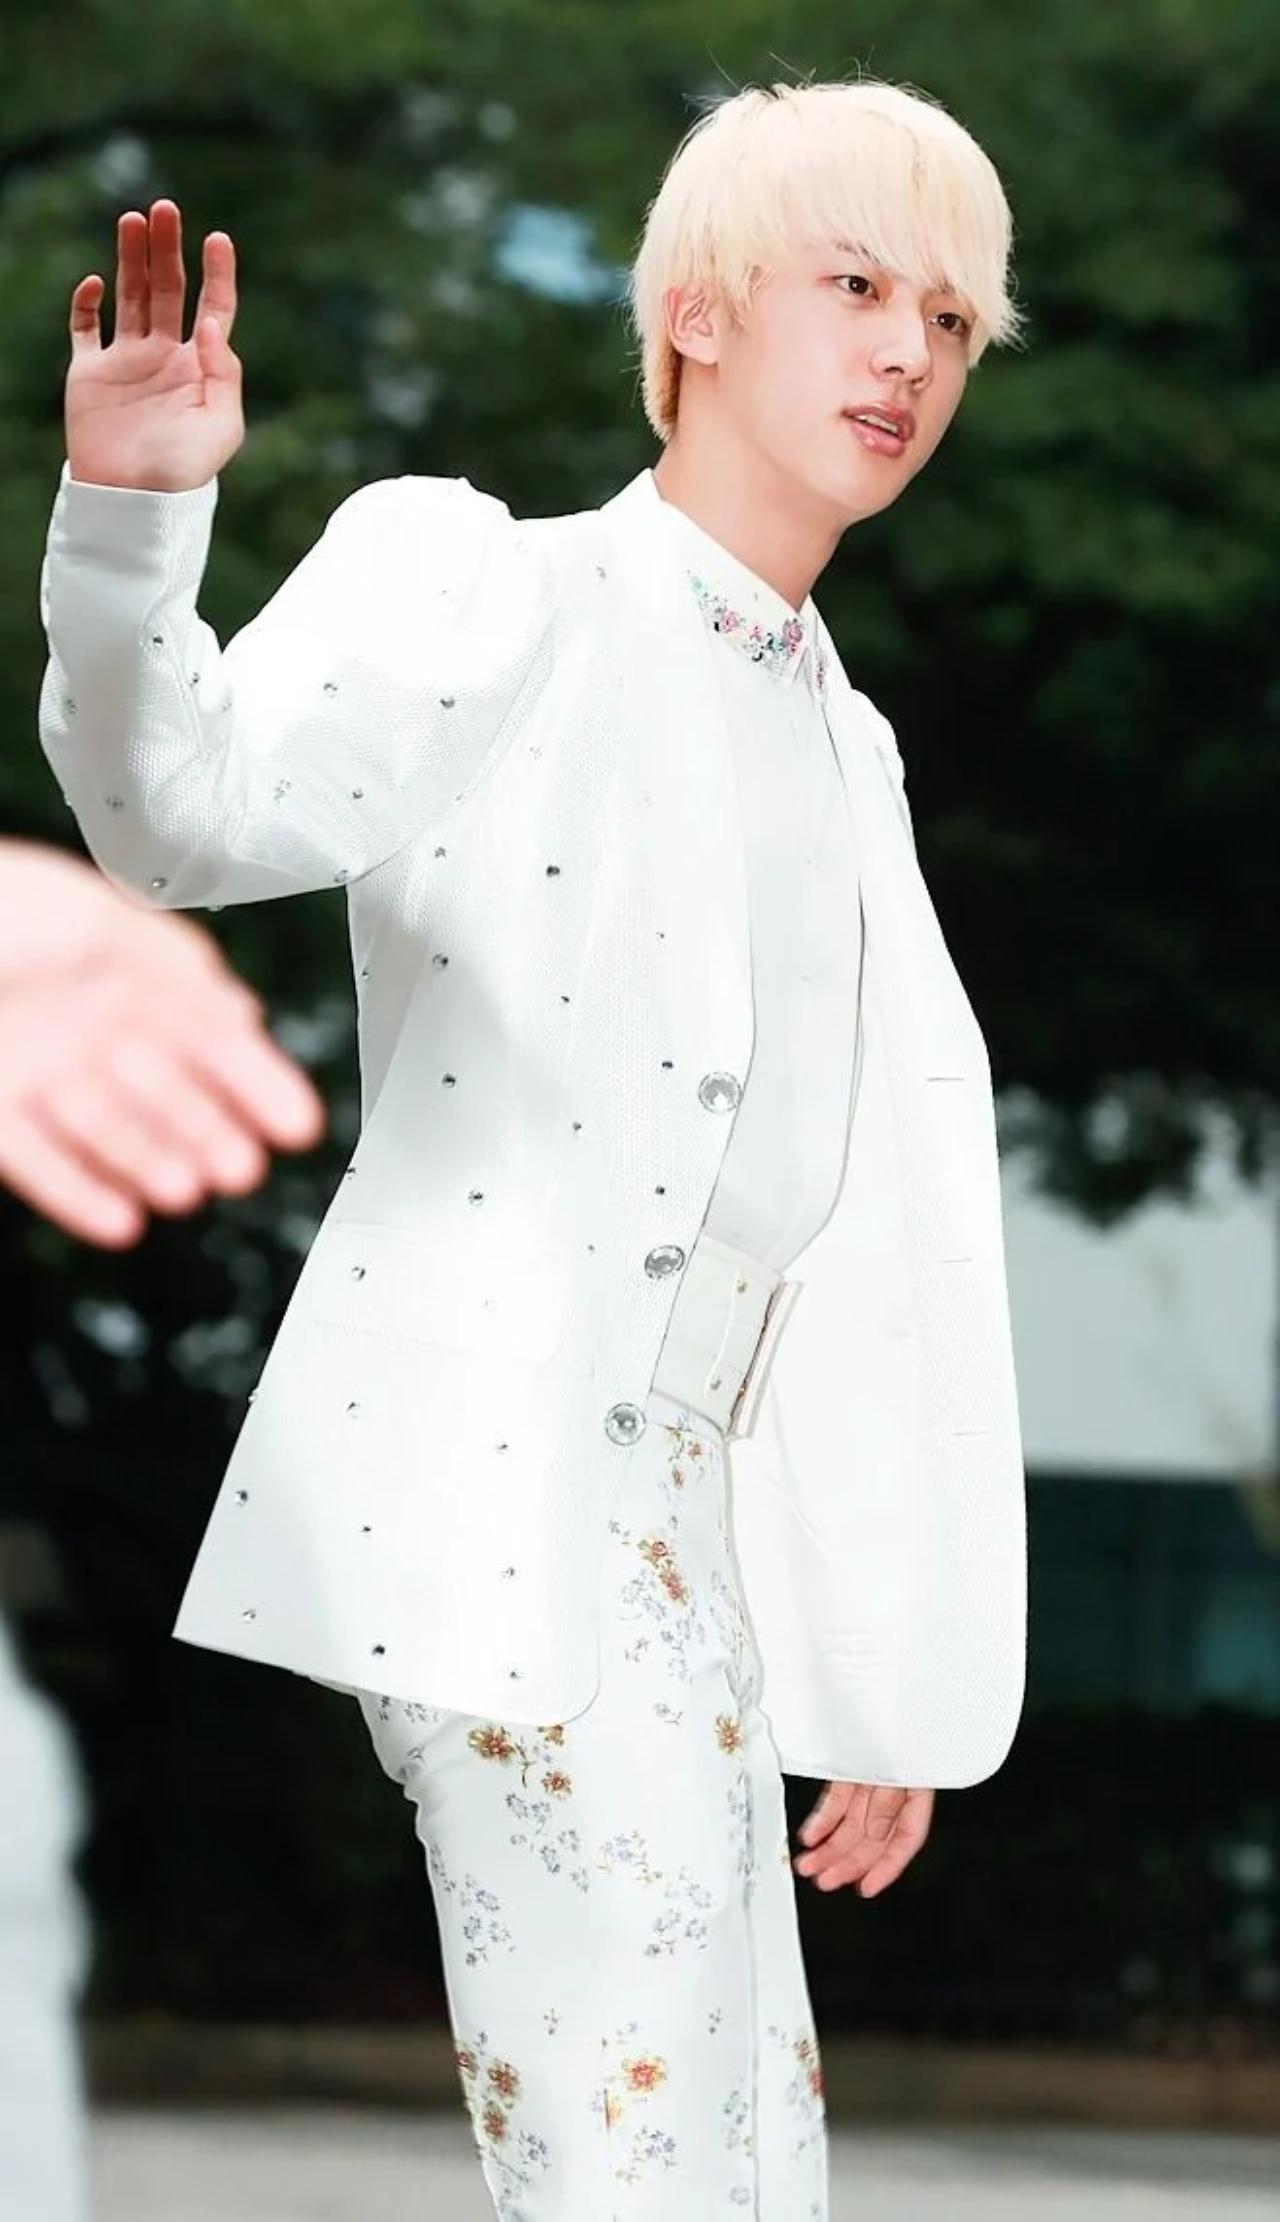 We are sure Jin woke up and chose violence for ARMY. While the paps are sure to be blown away from Jin's *ahem* royal *ahem* outfit, he looked like Prince Charming in ARMYs' eyes in his all-white sequinned suit